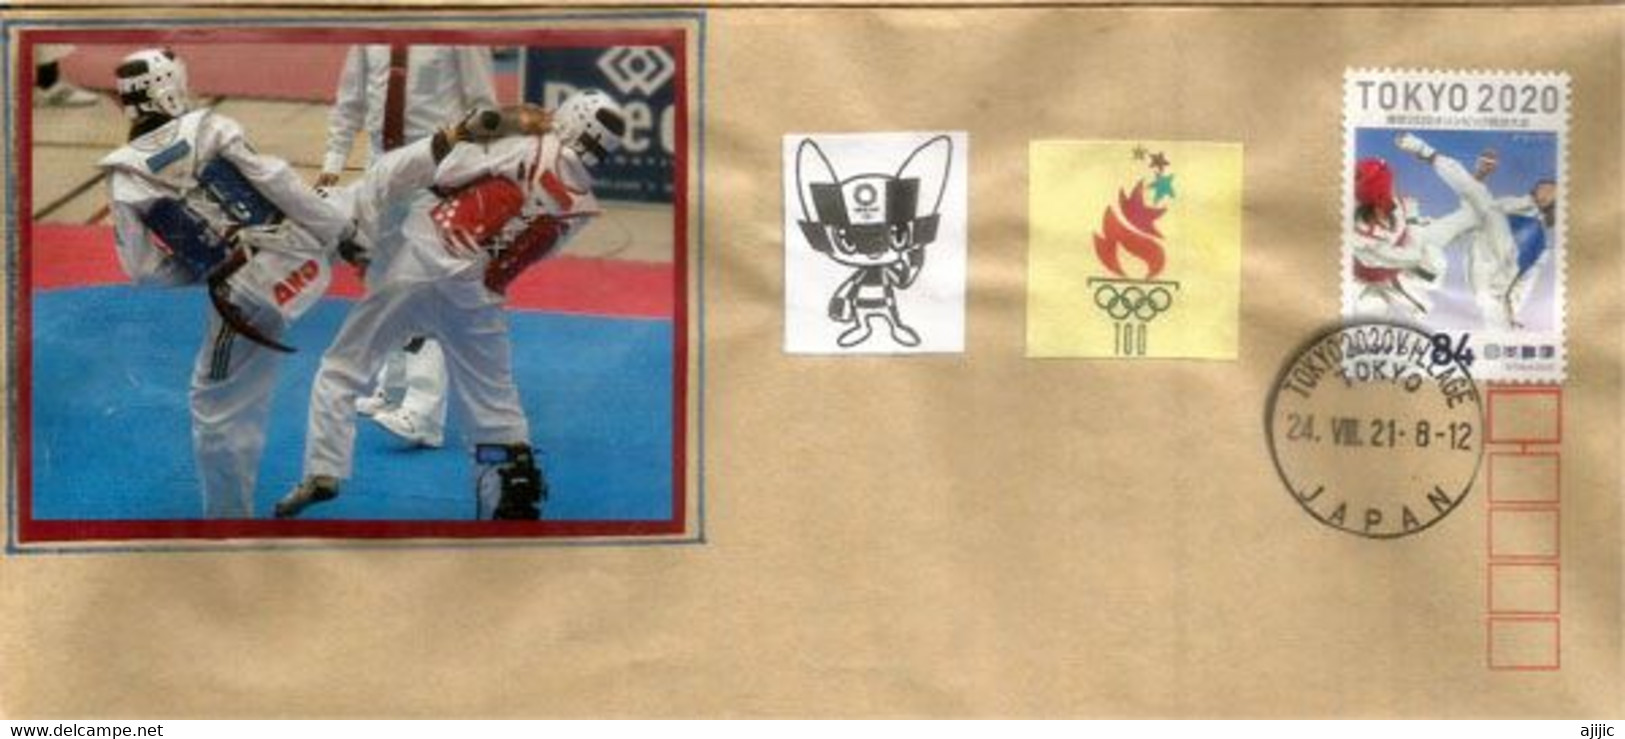 TAEKWONDO In TOKYO OLYMPICS 2020, (RARE-SCARCE LETTER FROM TOKYO OLYMPIC VILLAGE POST-OFFICE) - Summer 2020: Tokyo